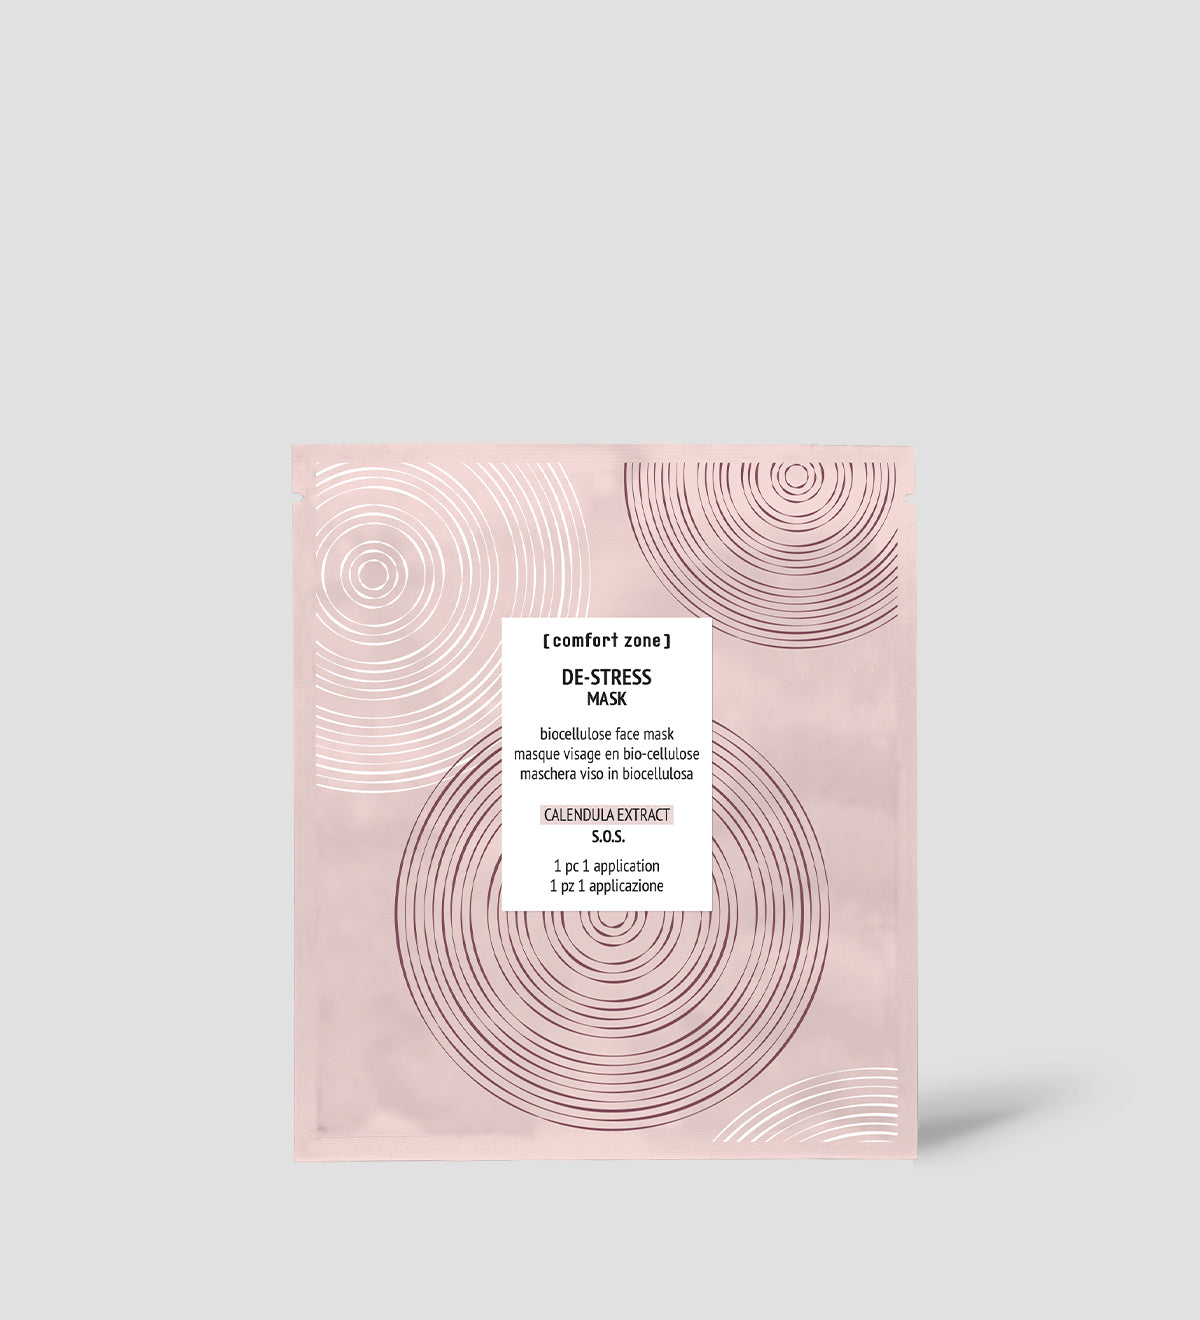 Comfort Zone: REMEDY DE-STRESS MASK  Bio-cellulose face mask for a soothing effect  <br> -